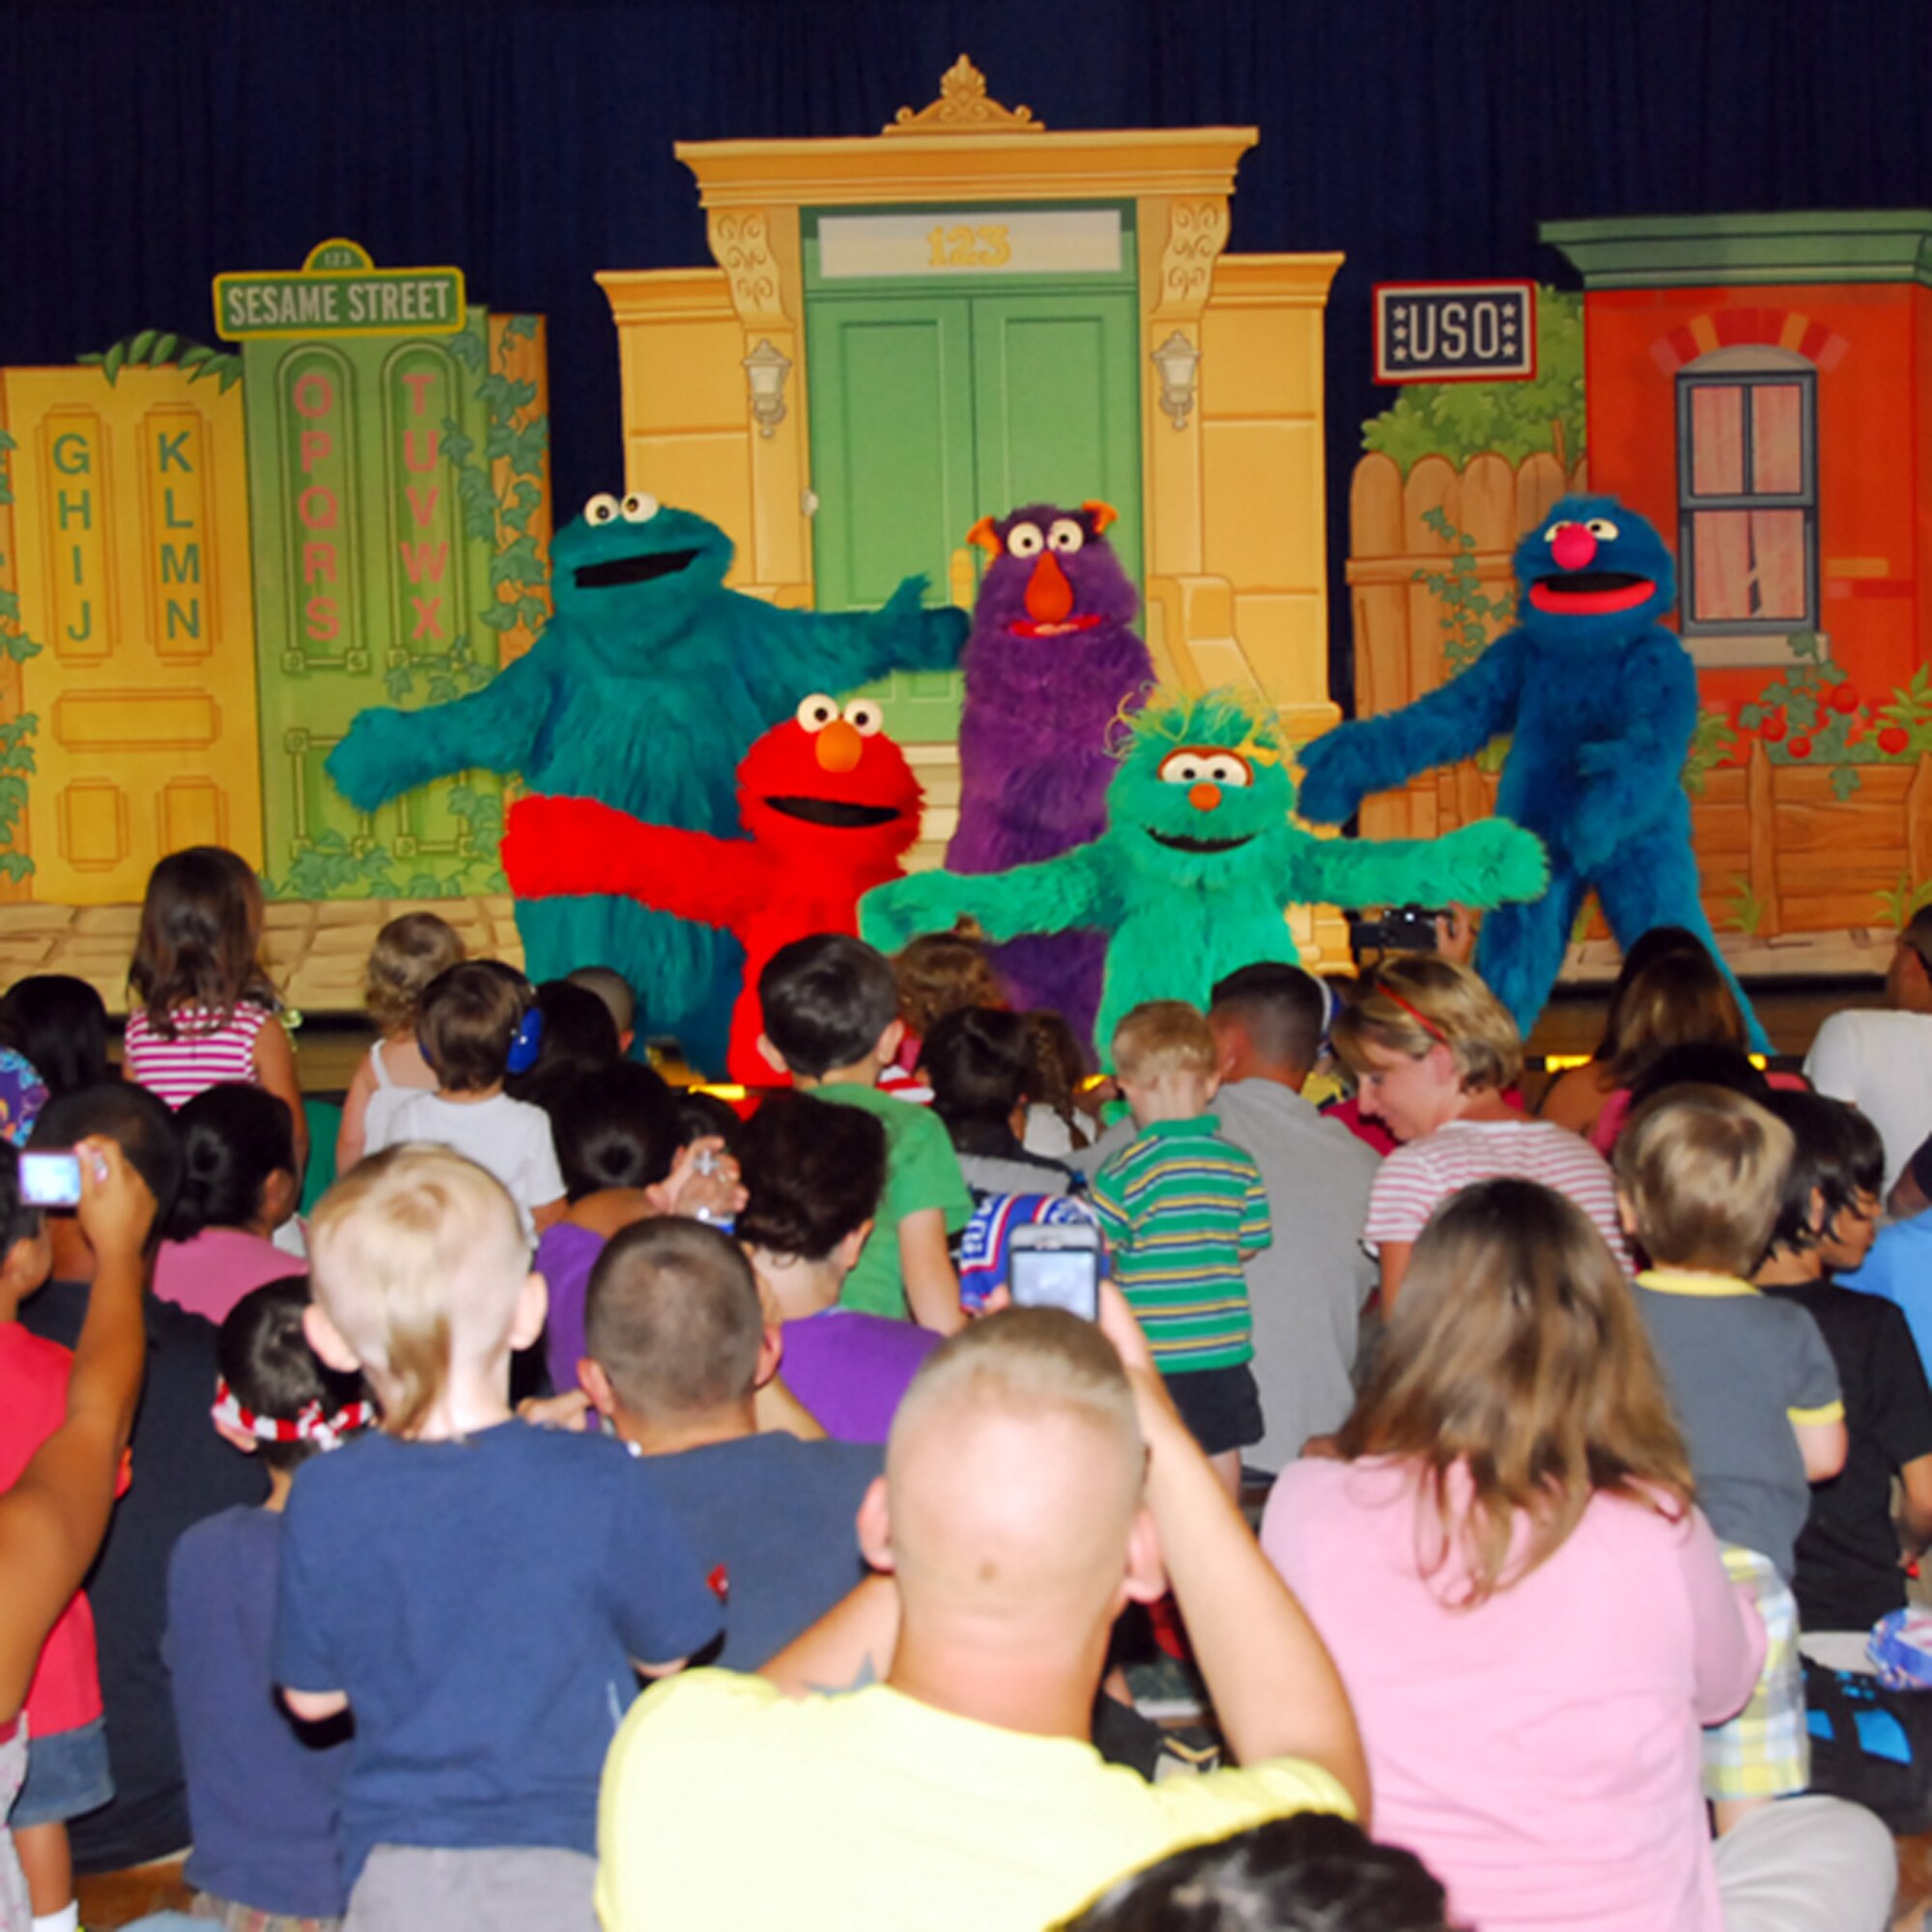 Characters from the Sesame Street television show paid a visit to Andersen AFB and performed for military members and their families June 9 at the Youth Center gym. The United Service Organizations teamed with Sesame Workshop, the non-profit organization that produces Sesame Street, to bring The Sesame Street/USO Experience for Military Families to the Asia-Pacific region. (U.S. Air Force photo/Airman 1st Class Whitney Tucker) 

 
